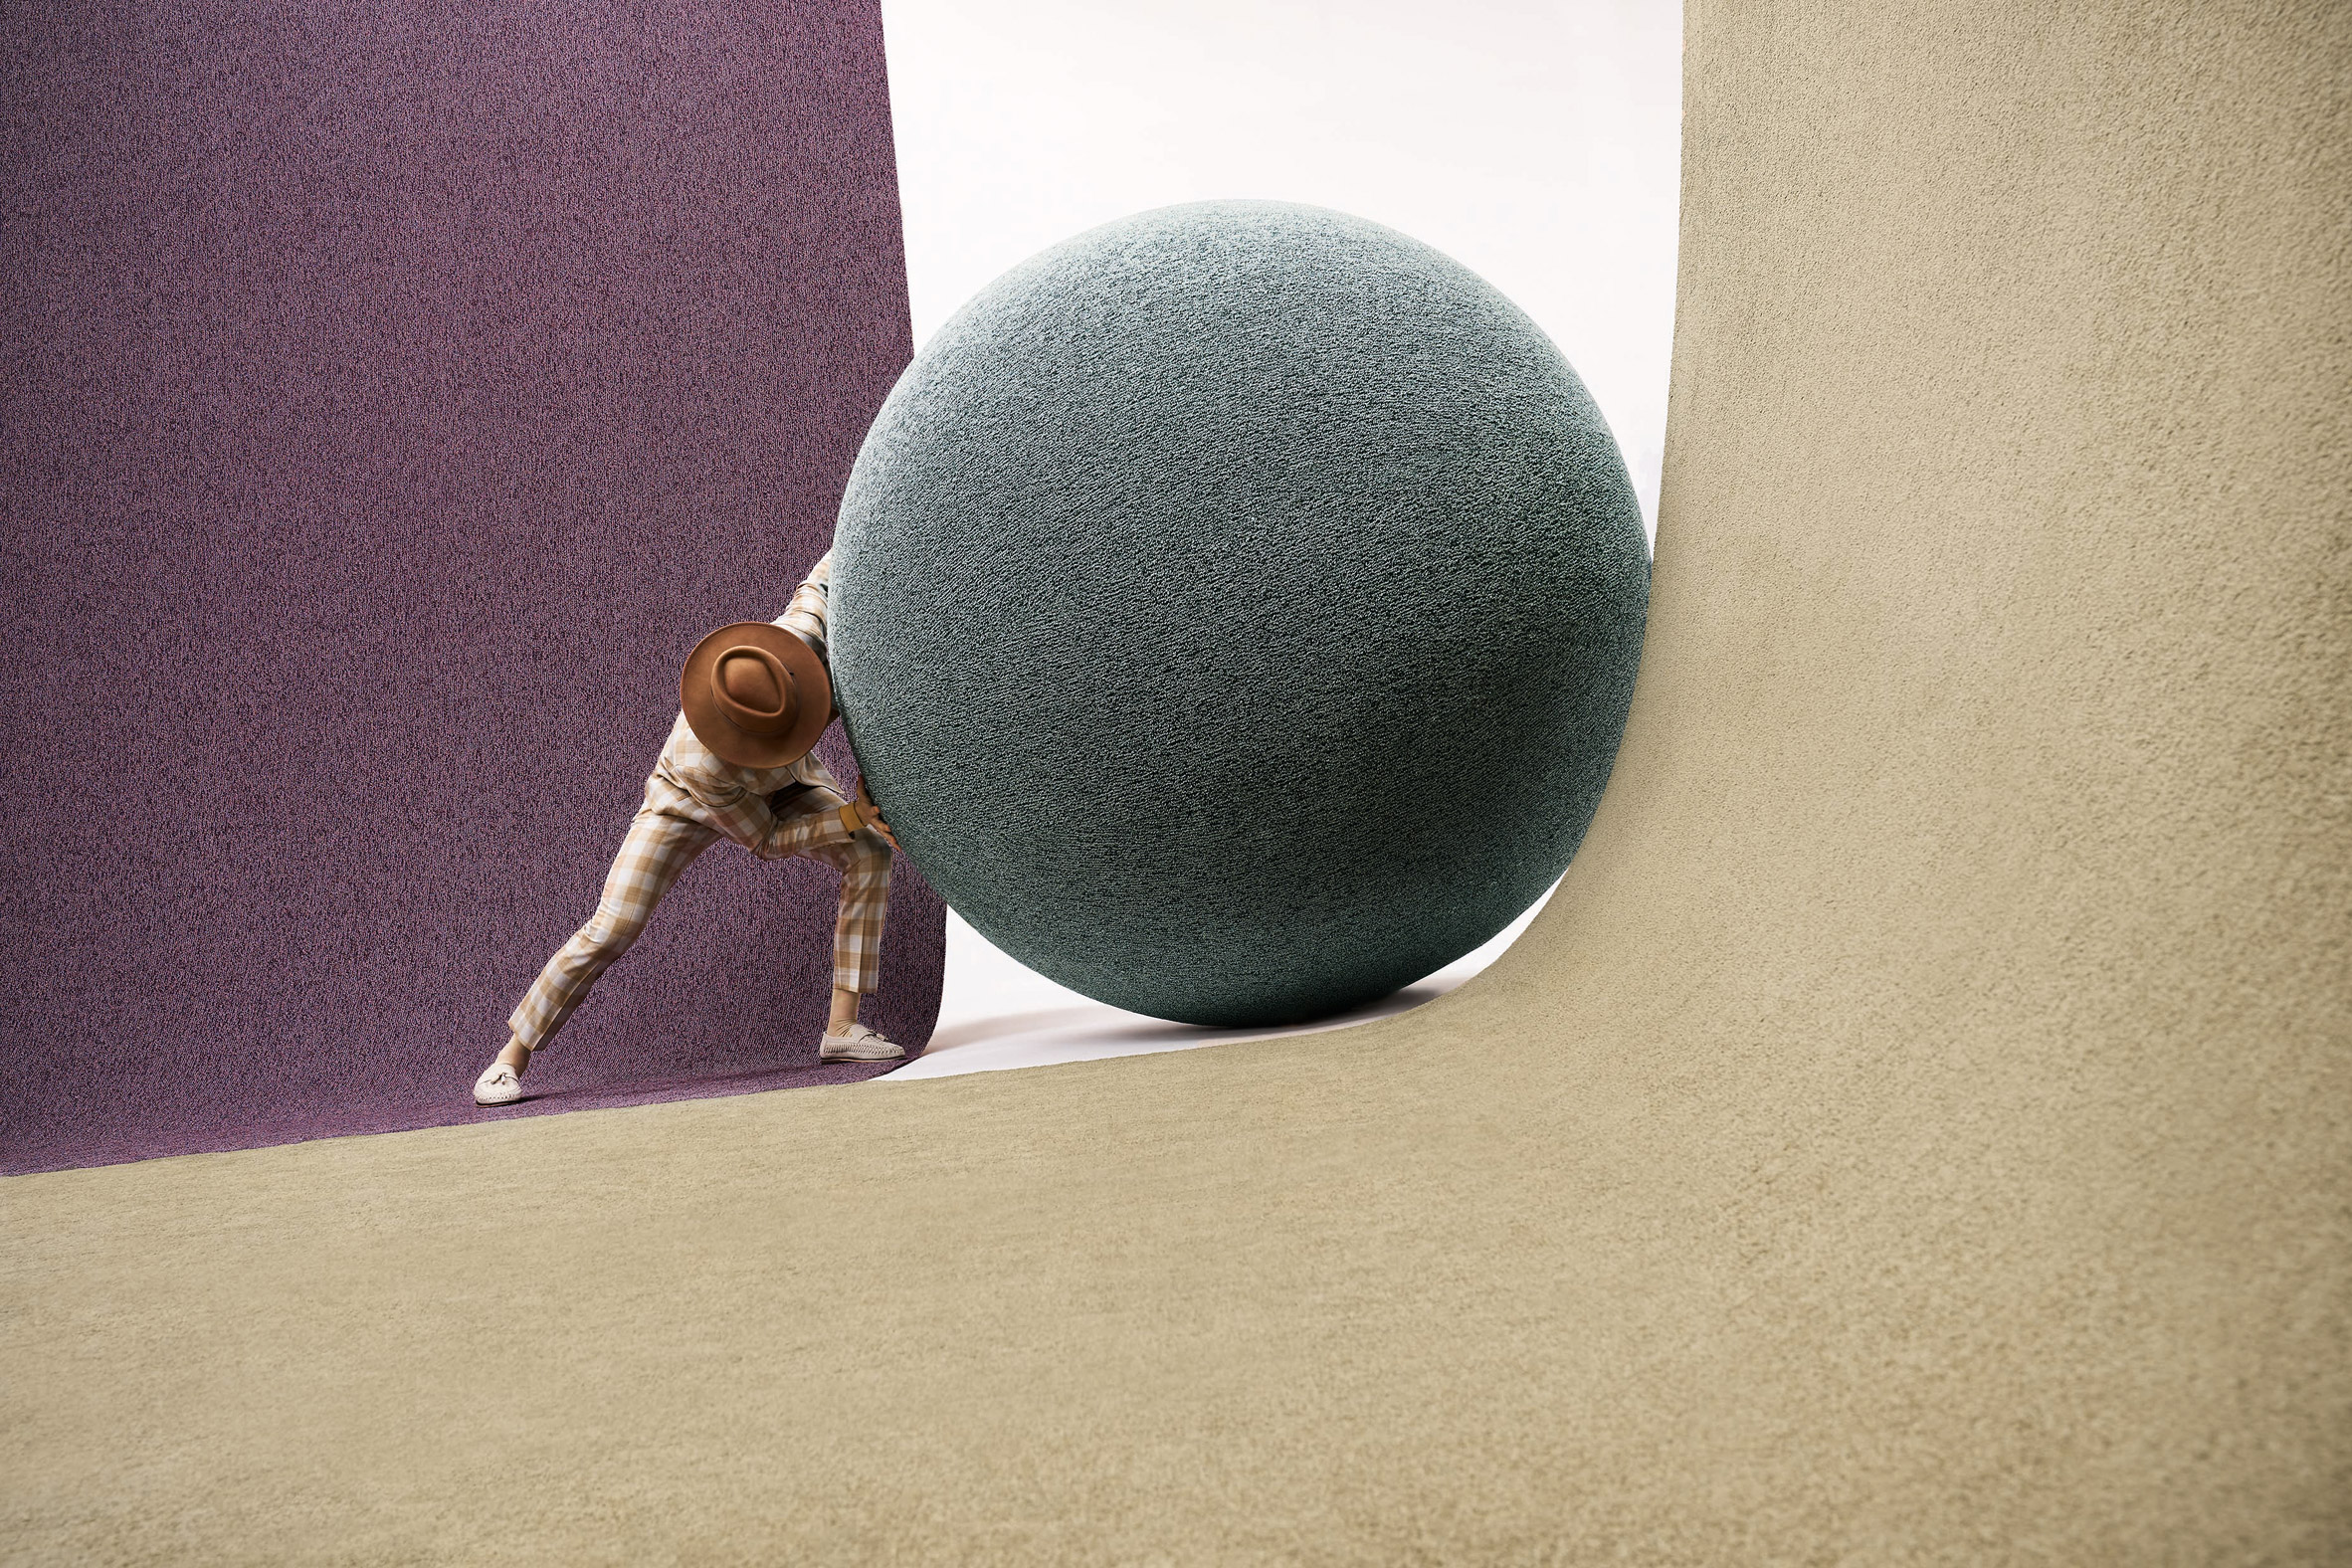 Object Carpet teams up with Ippolito Fleitz Group for new carpet collection